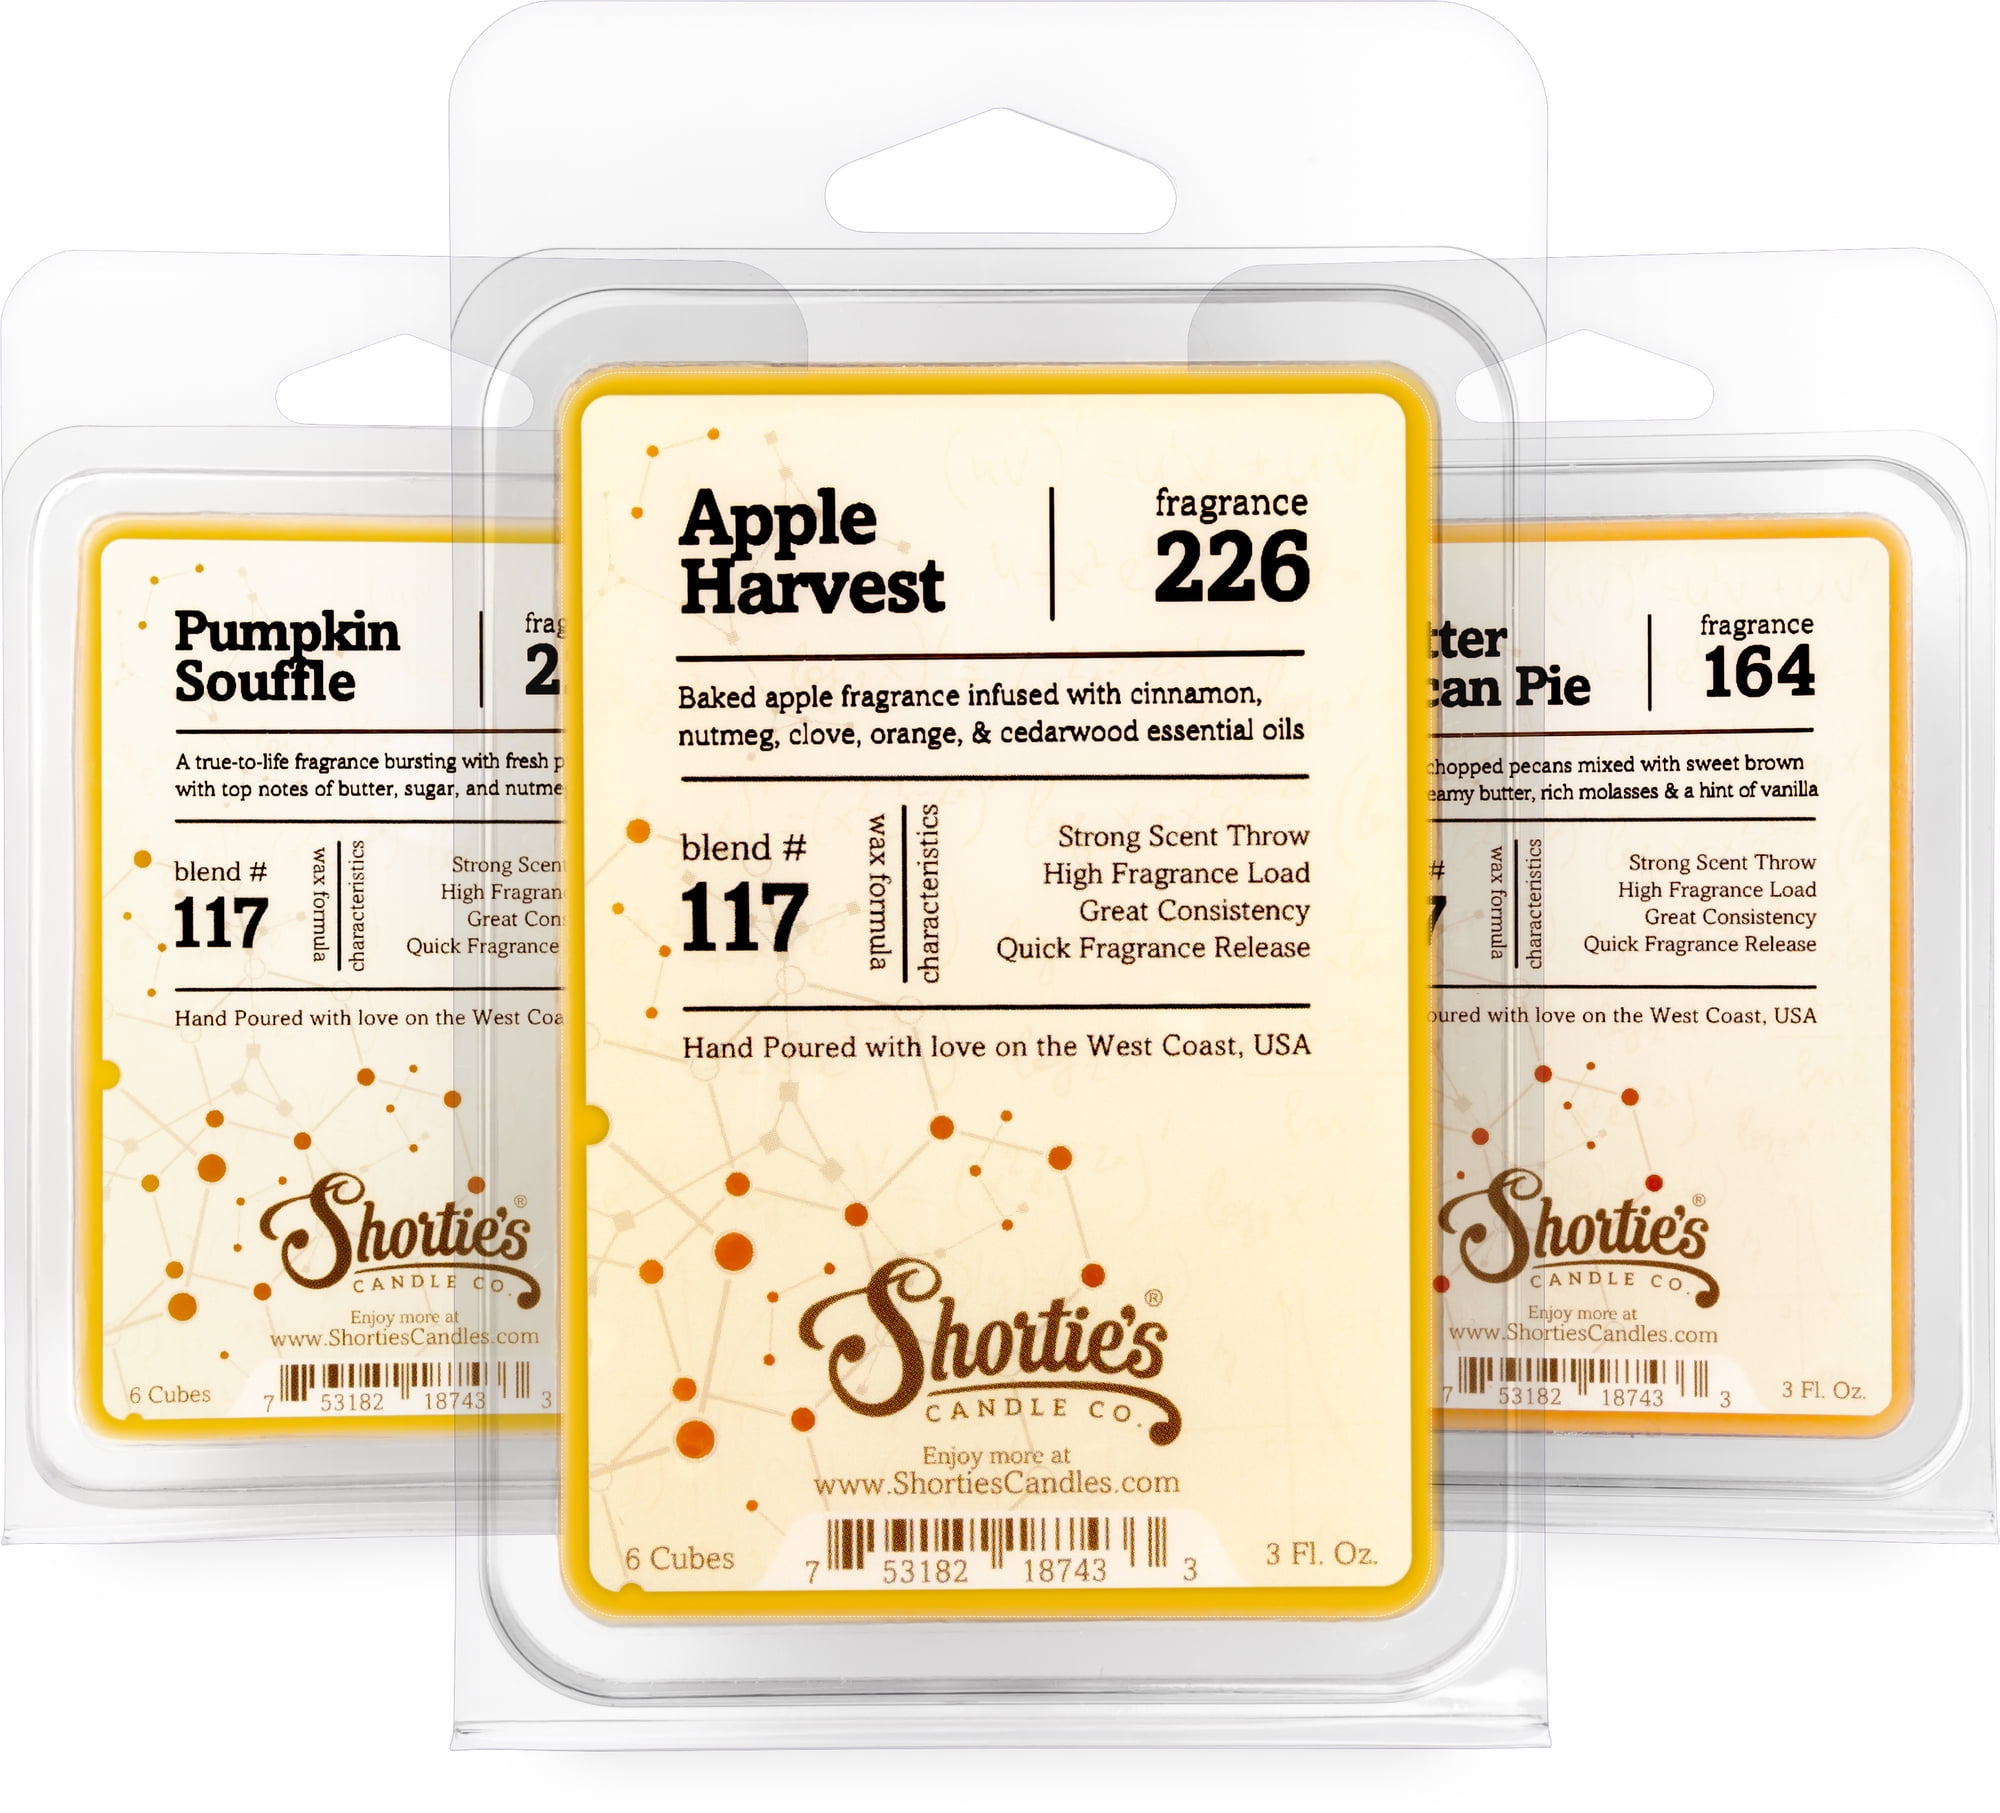 Natural Fall Soy Wax Melts Variety Pack - Apple Harvest, Butter Pecan Pie, Pumpkin Souffle - All Natural + Essential Oils + Phthalate Free - Shortie's